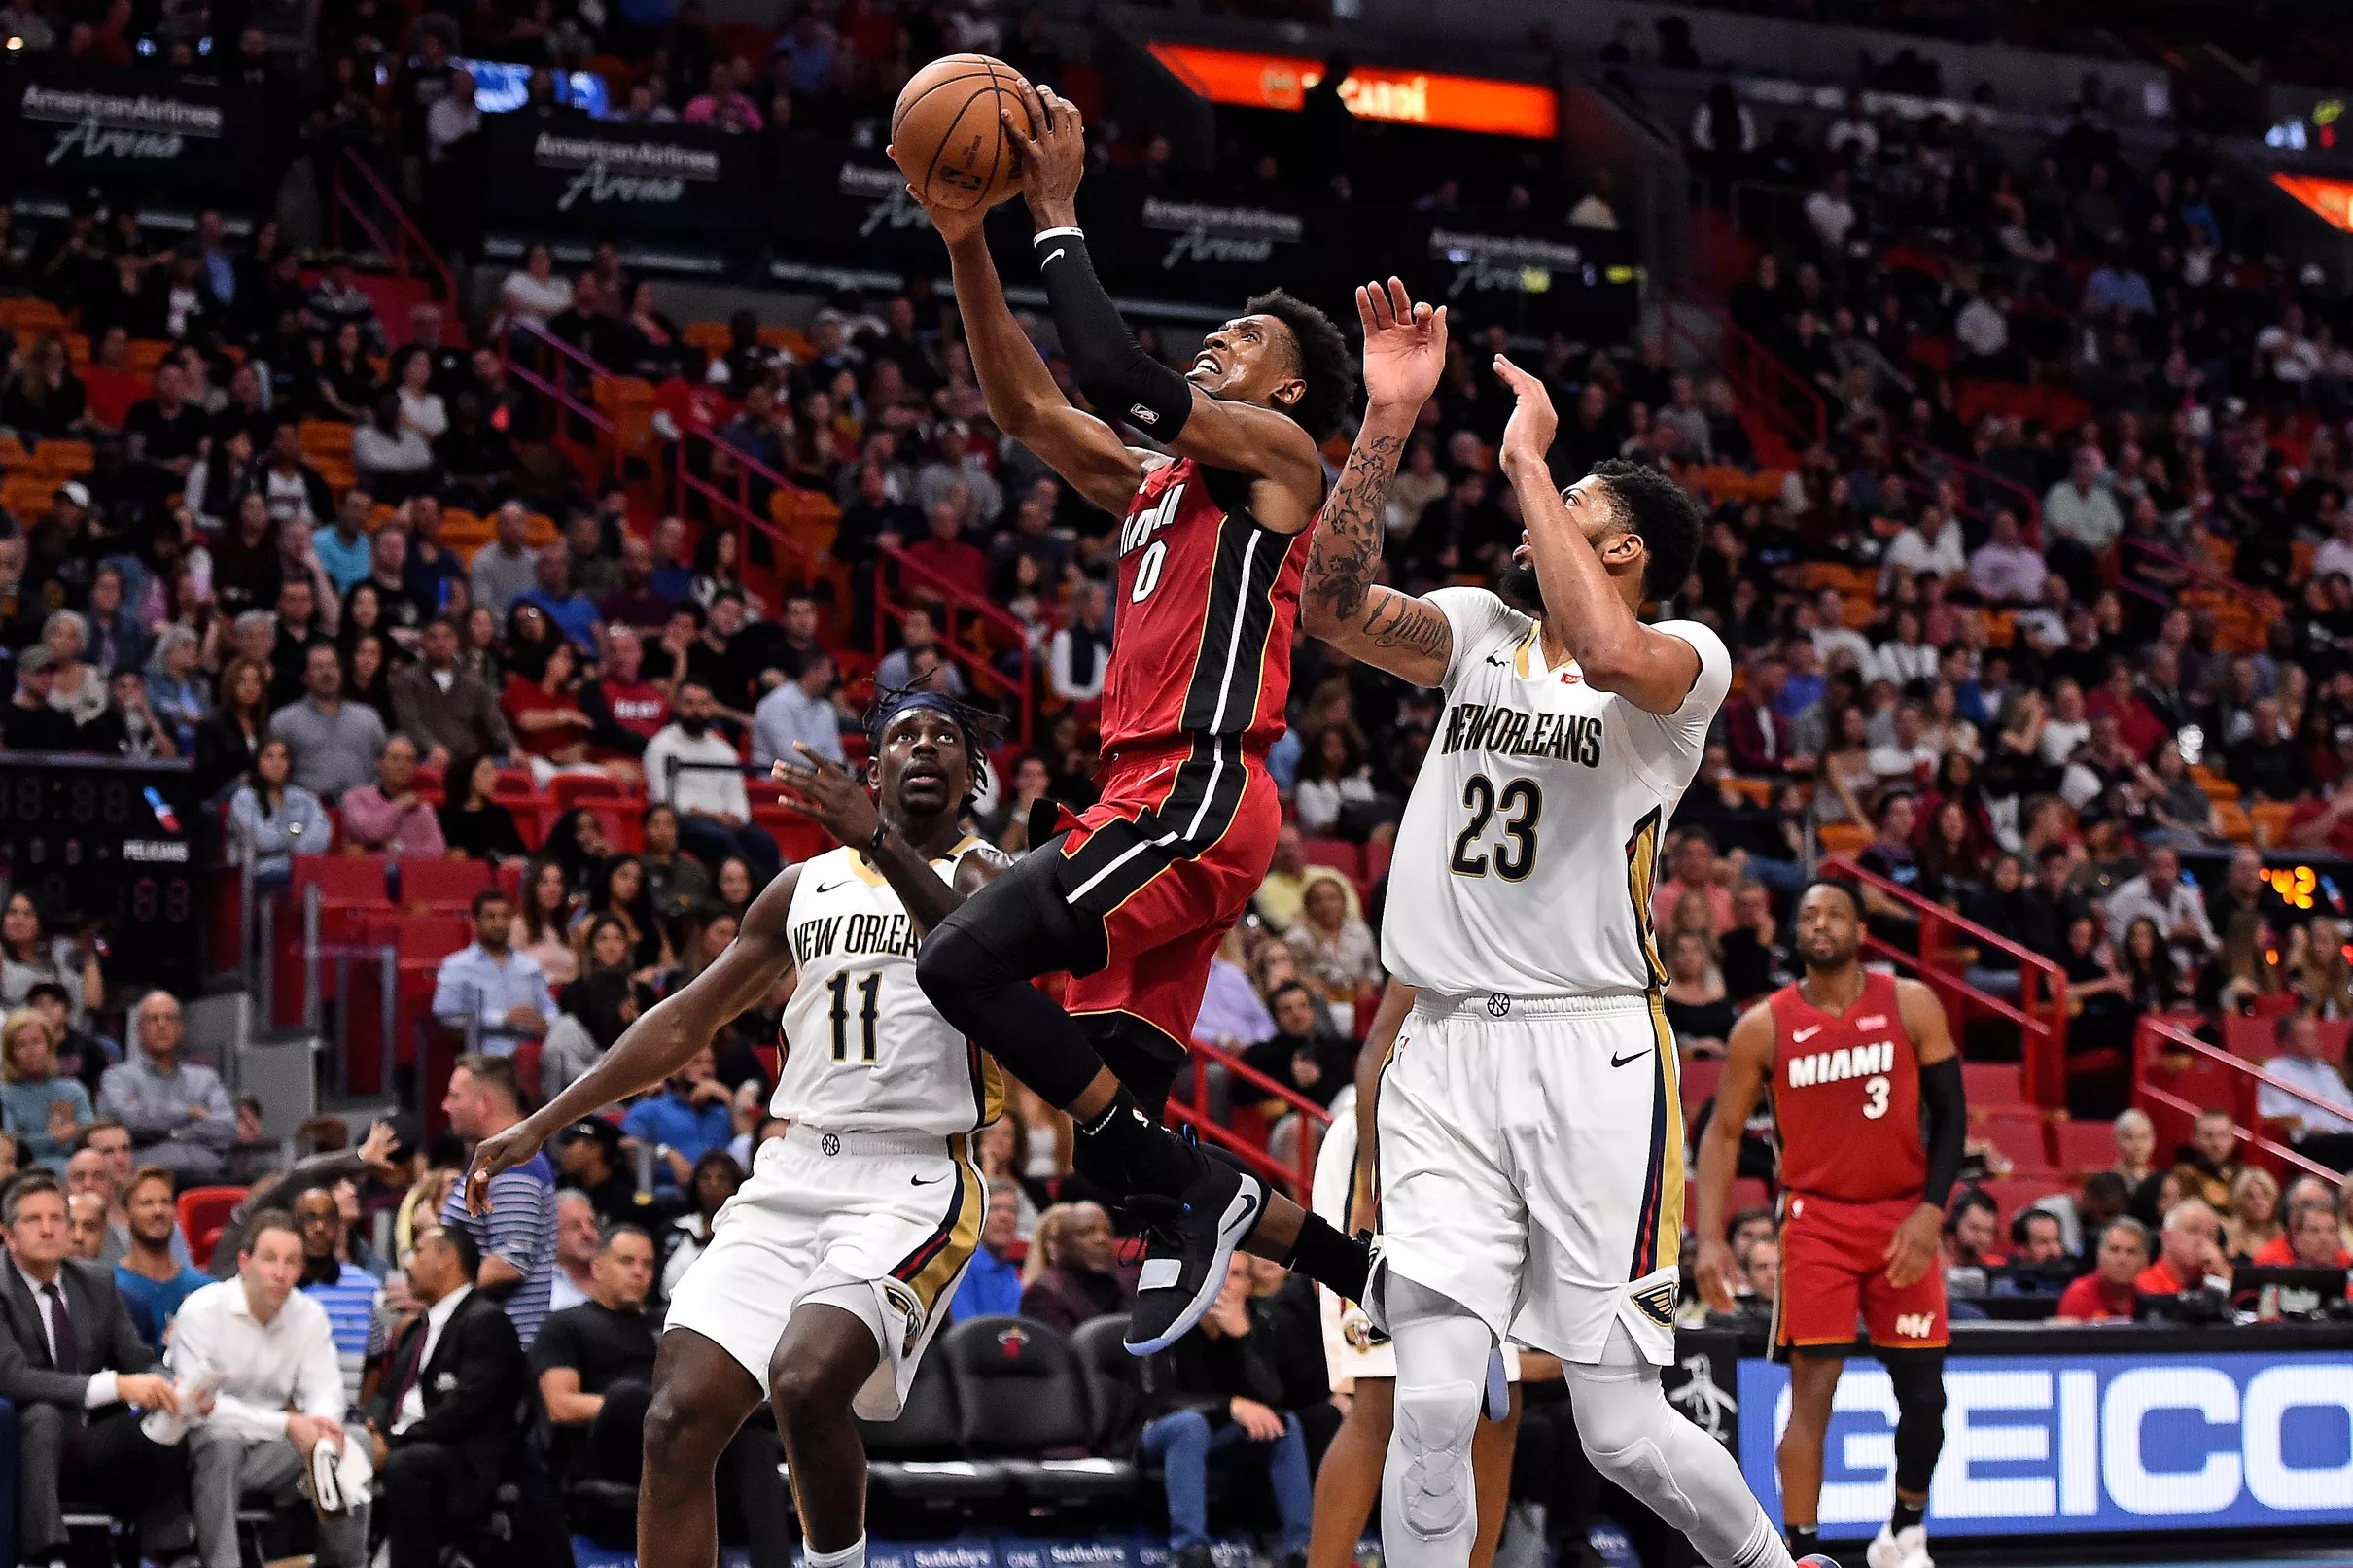 Heat end home losing streak with 106-101 win against Pelicans